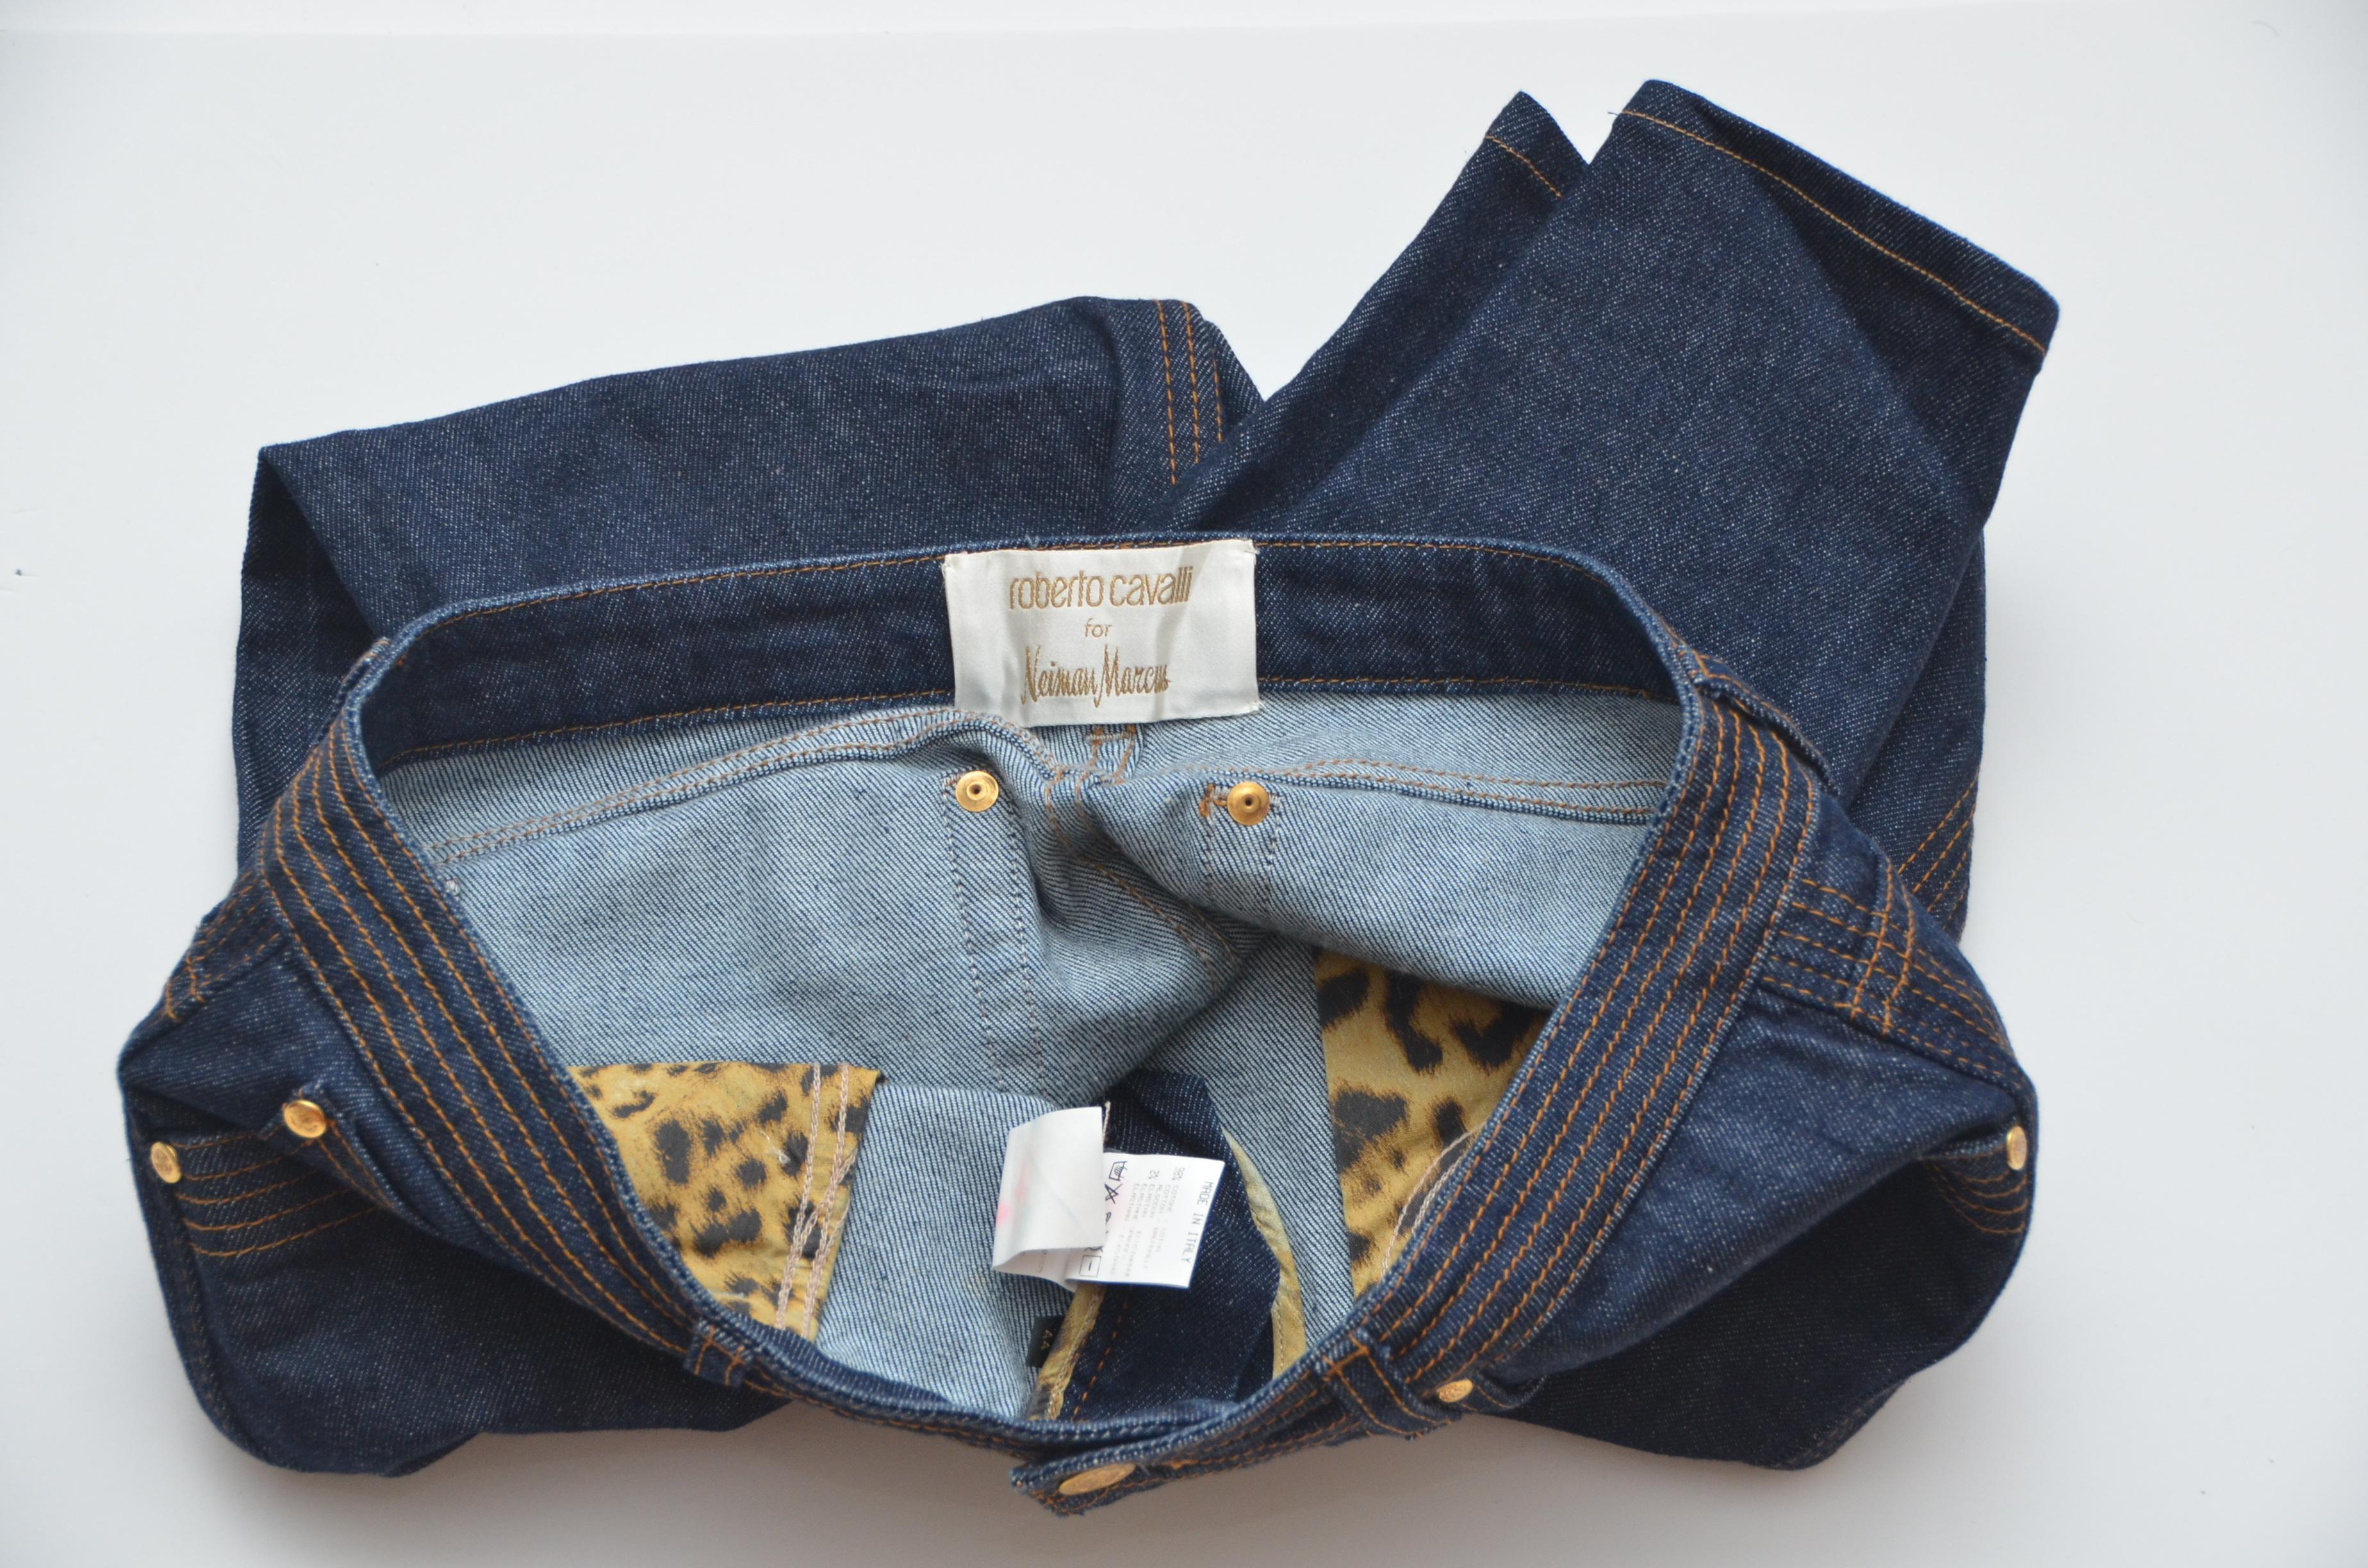 Roberto Cavalli for NM denim jeans
Excellent condition, no flaws to report
Made in Italy.
Gold horse pin embellishment on the back pocket 
Size 44IT
Approximate waist 34